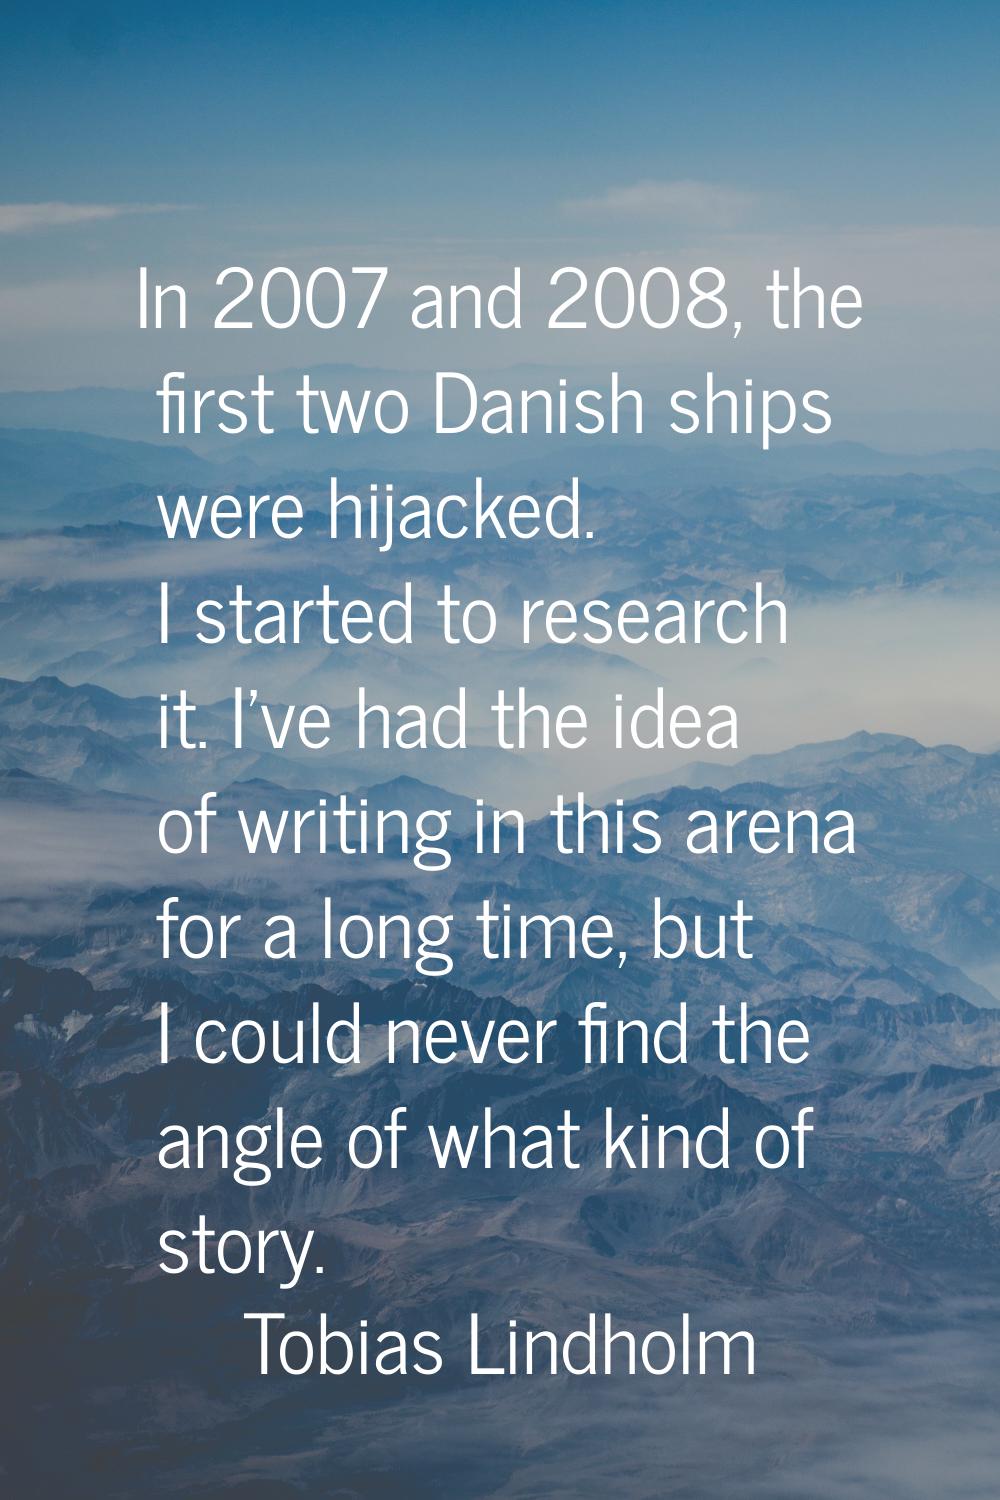 In 2007 and 2008, the first two Danish ships were hijacked. I started to research it. I've had the 